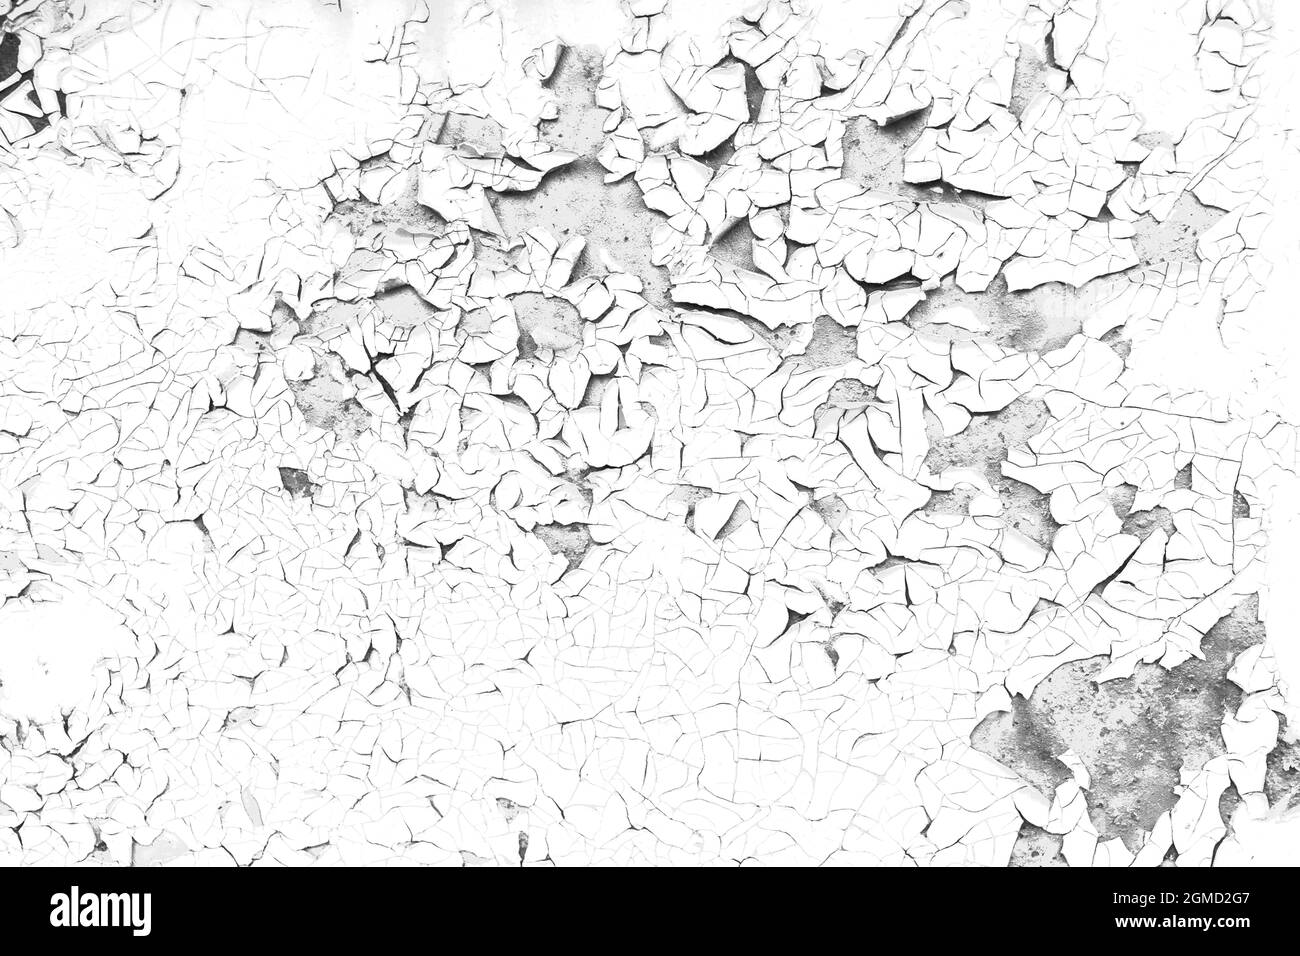 Cracked painted background. Grunge contrast black and white texture template for overlay artwork. Stock Photo